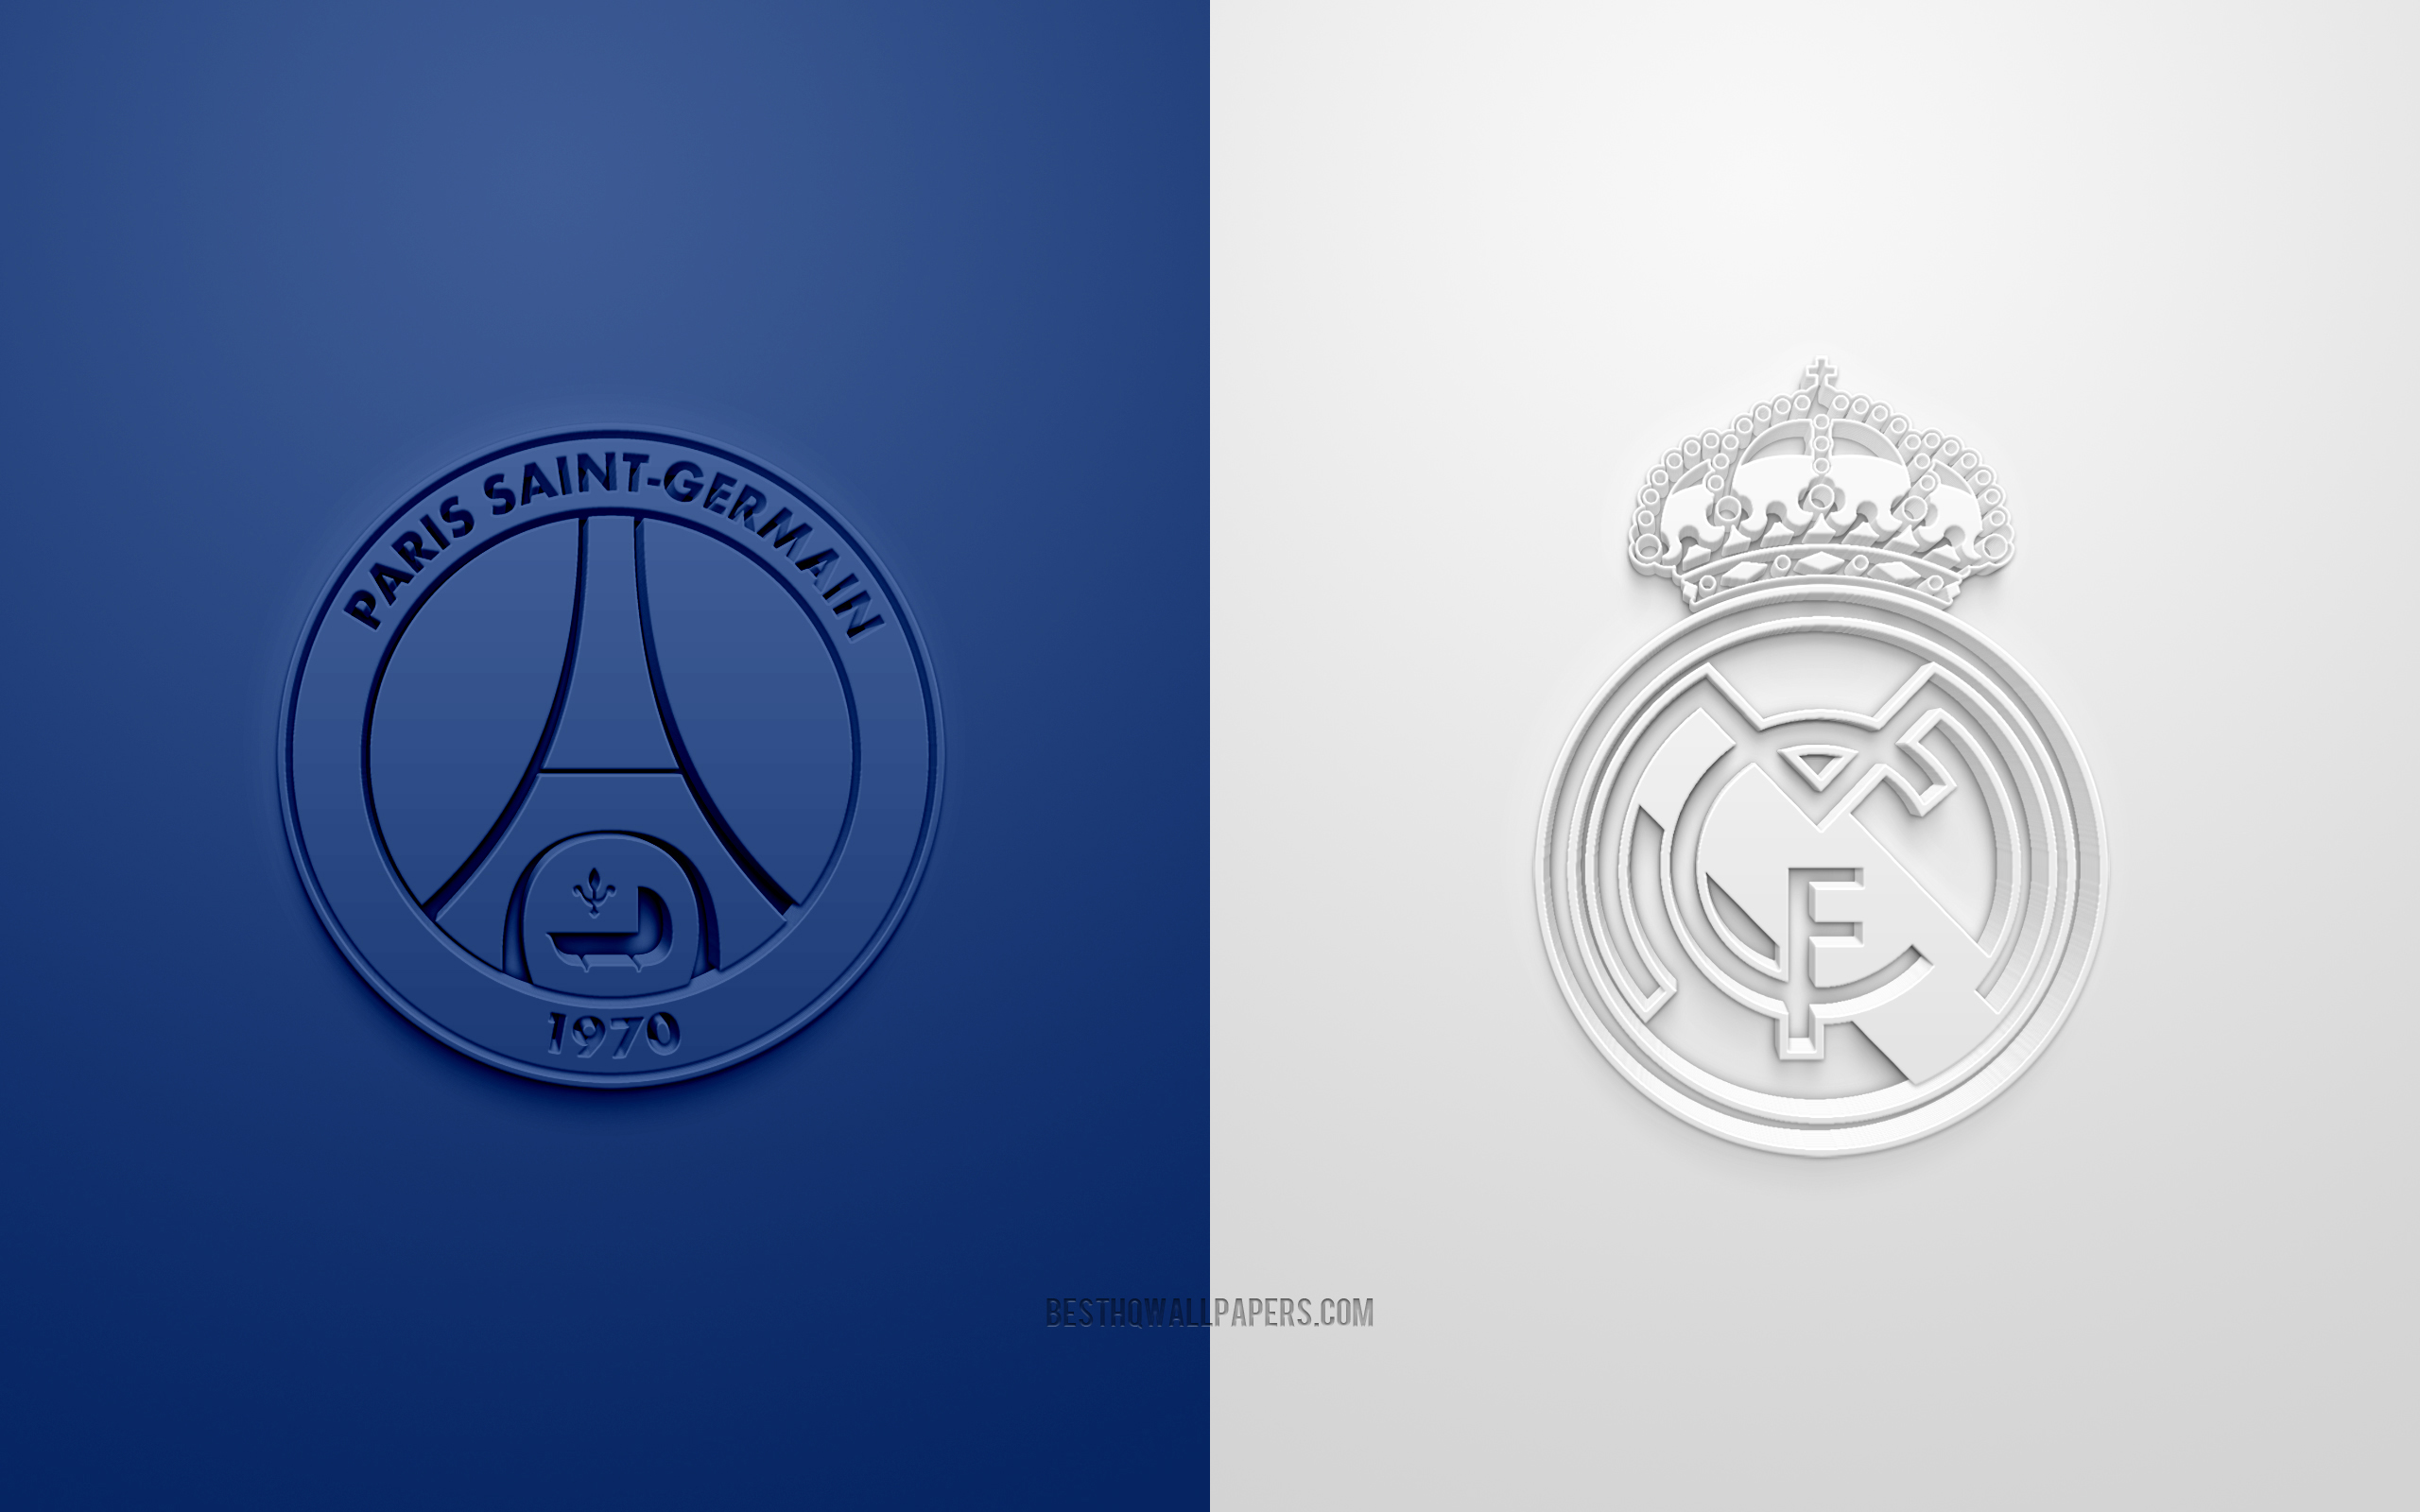 Download Wallpaper PSG Vs Real Madrid, UEFA Champions League, Eighth Finals, 3D Logos, White Blue Background, Champions League, Football Match, 2022 Champions League, PSG, Real Madrid For Desktop With Resolution 2560x1600. High